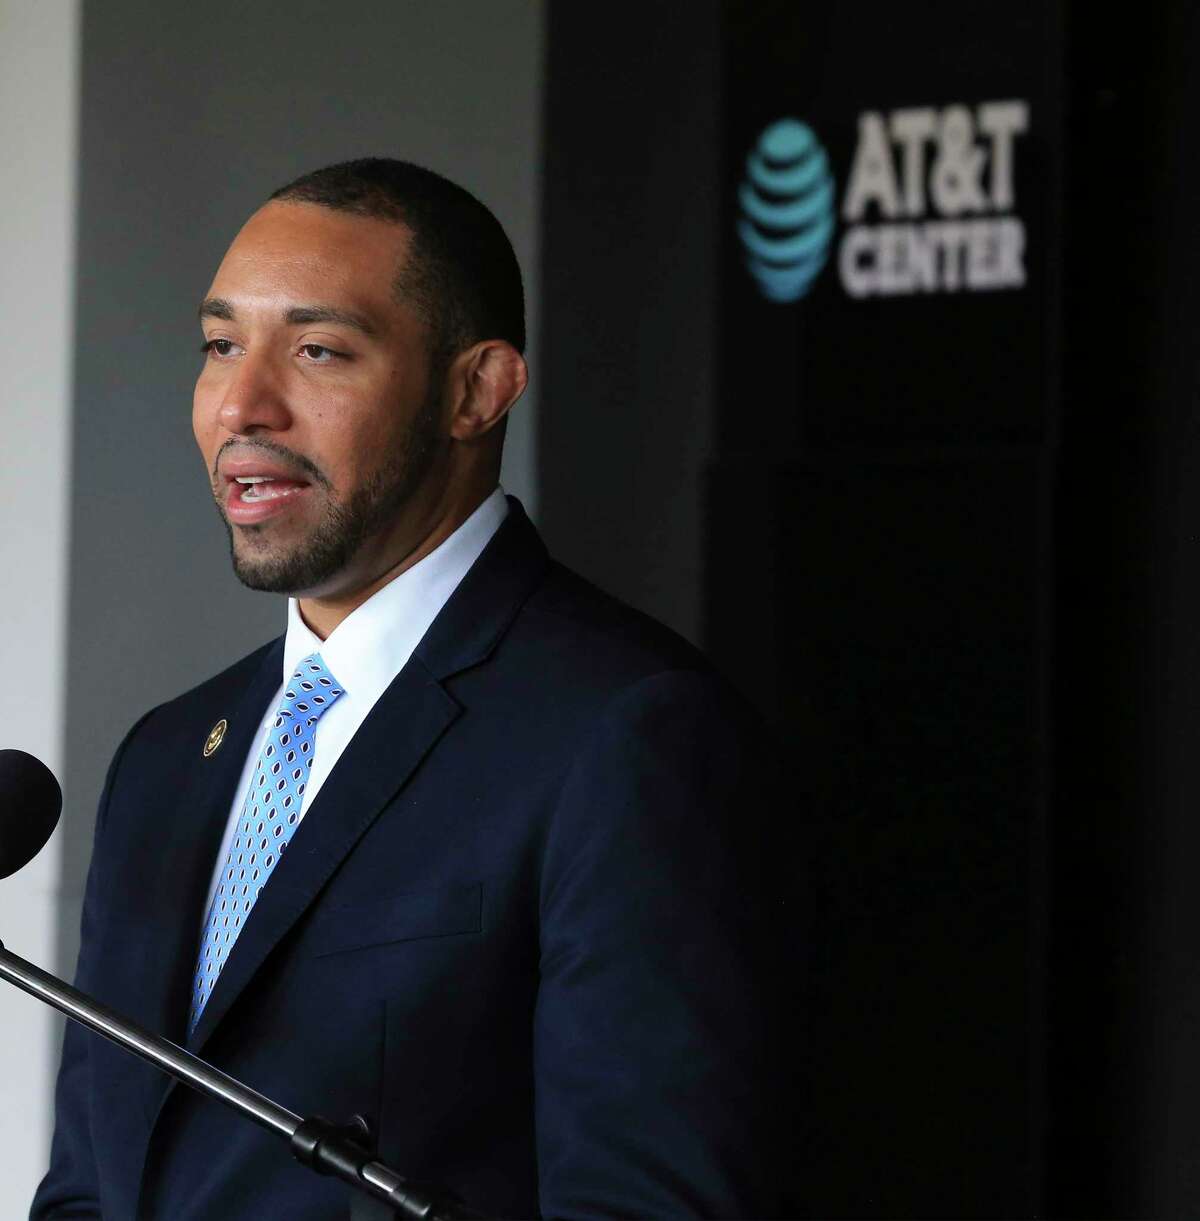 Bexar County Commissioner Calvert gives update on AT&T Center